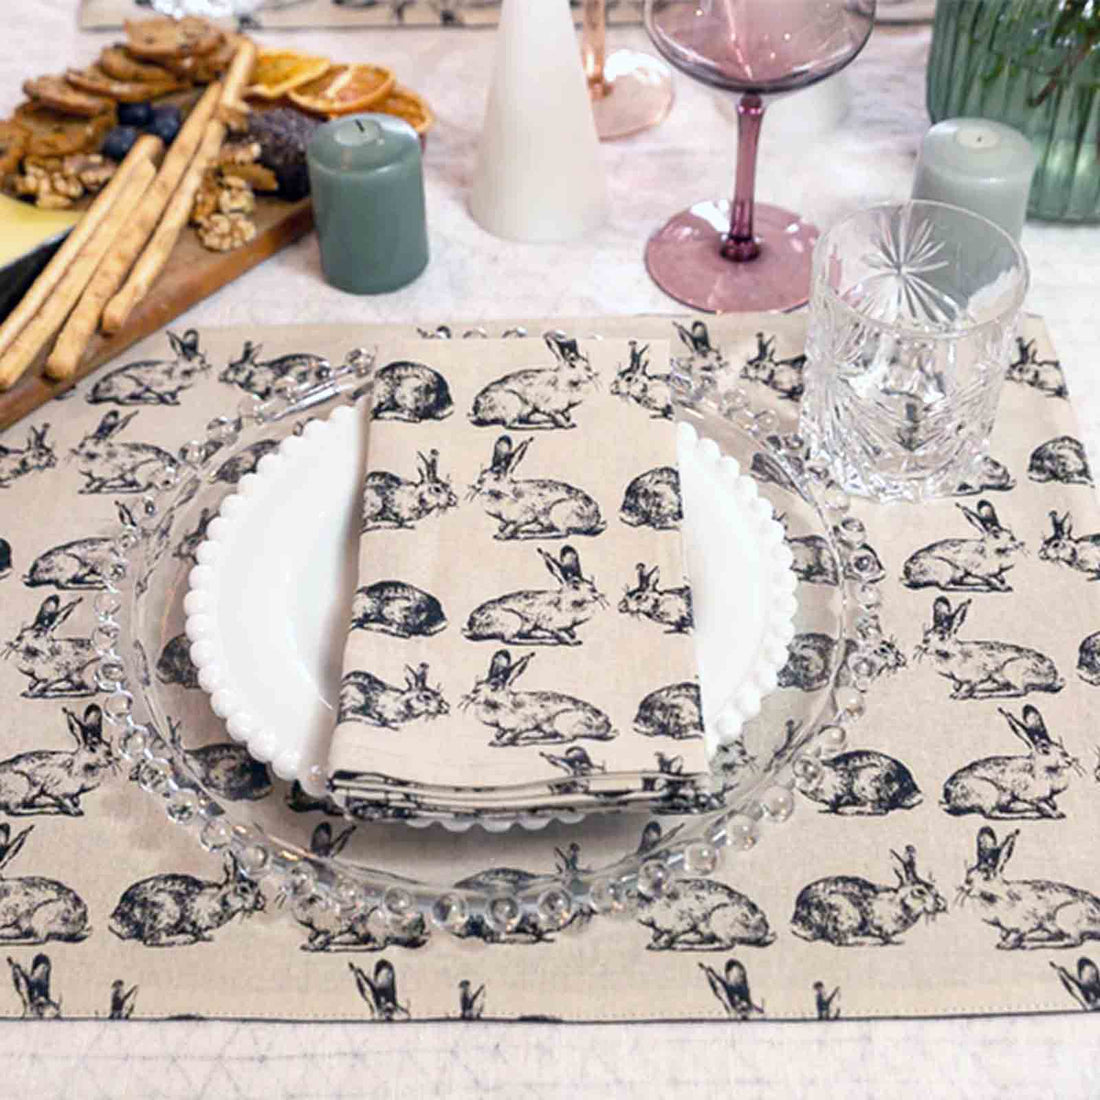 Hare 100% Cotton Fabric Placemats - Set of 4